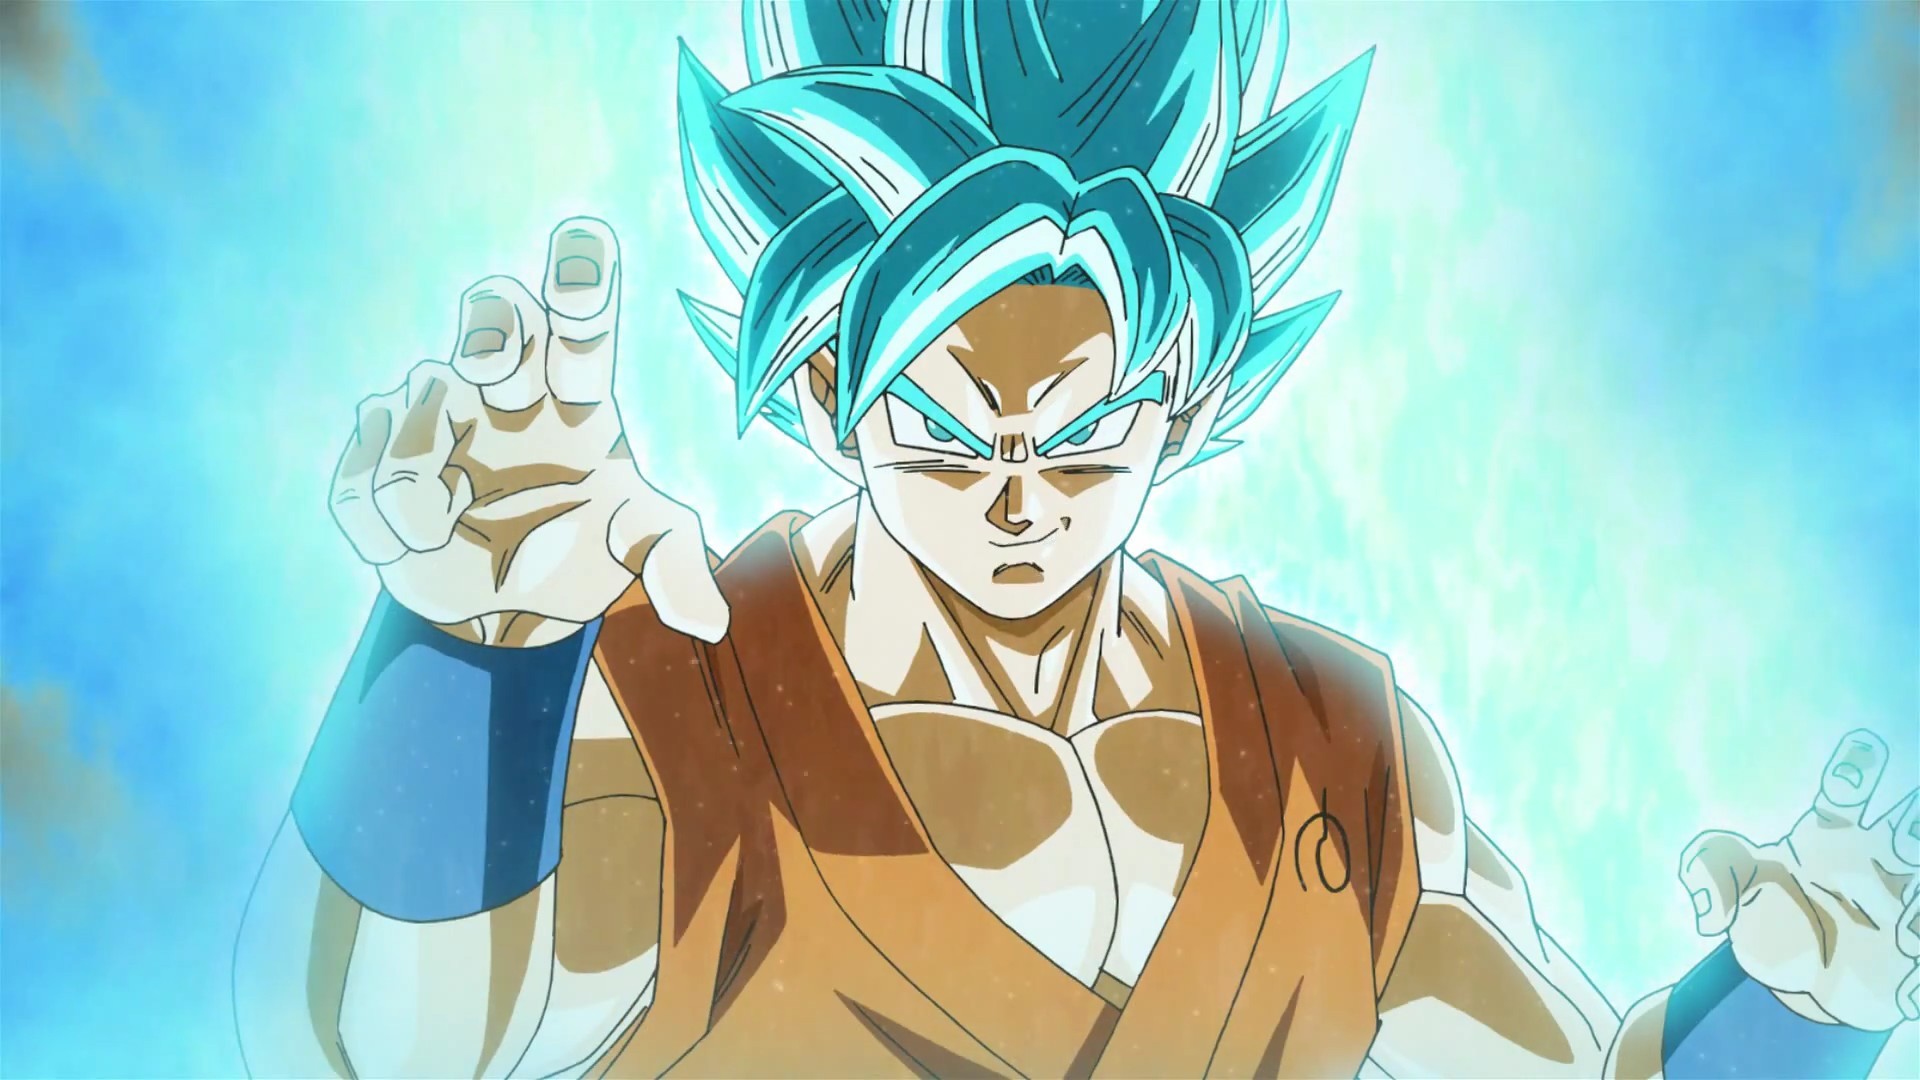 Desktop Wallpaper Goku SSJ Blue with image resolution 1920x1080 pixel. You can use this wallpaper as background for your desktop Computer Screensavers, Android or iPhone smartphones